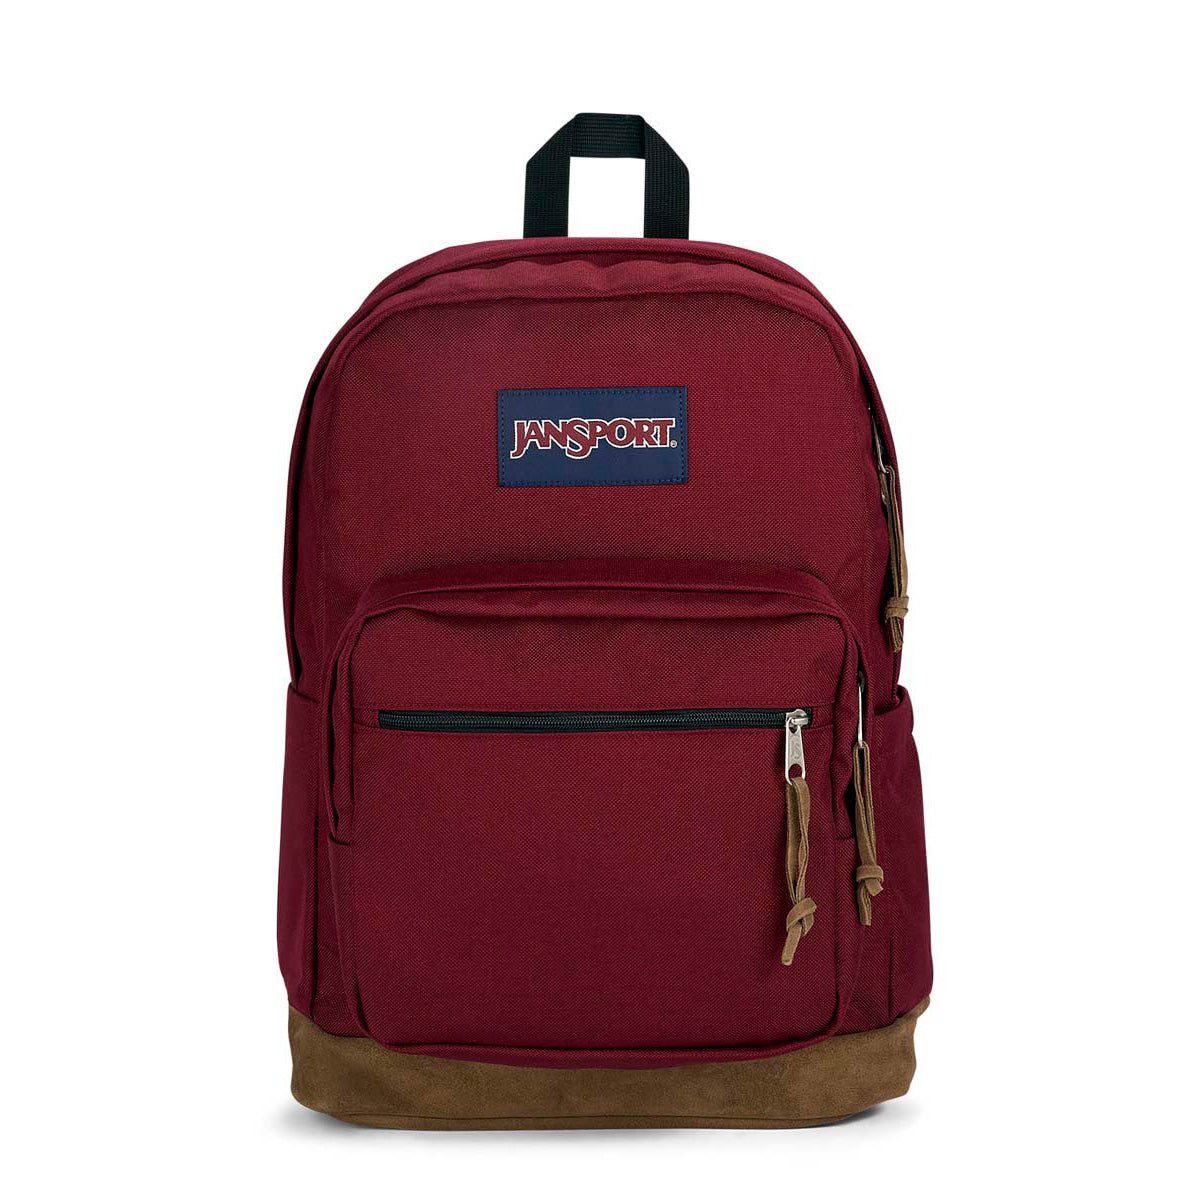 JanSport Right Pack Russet Red